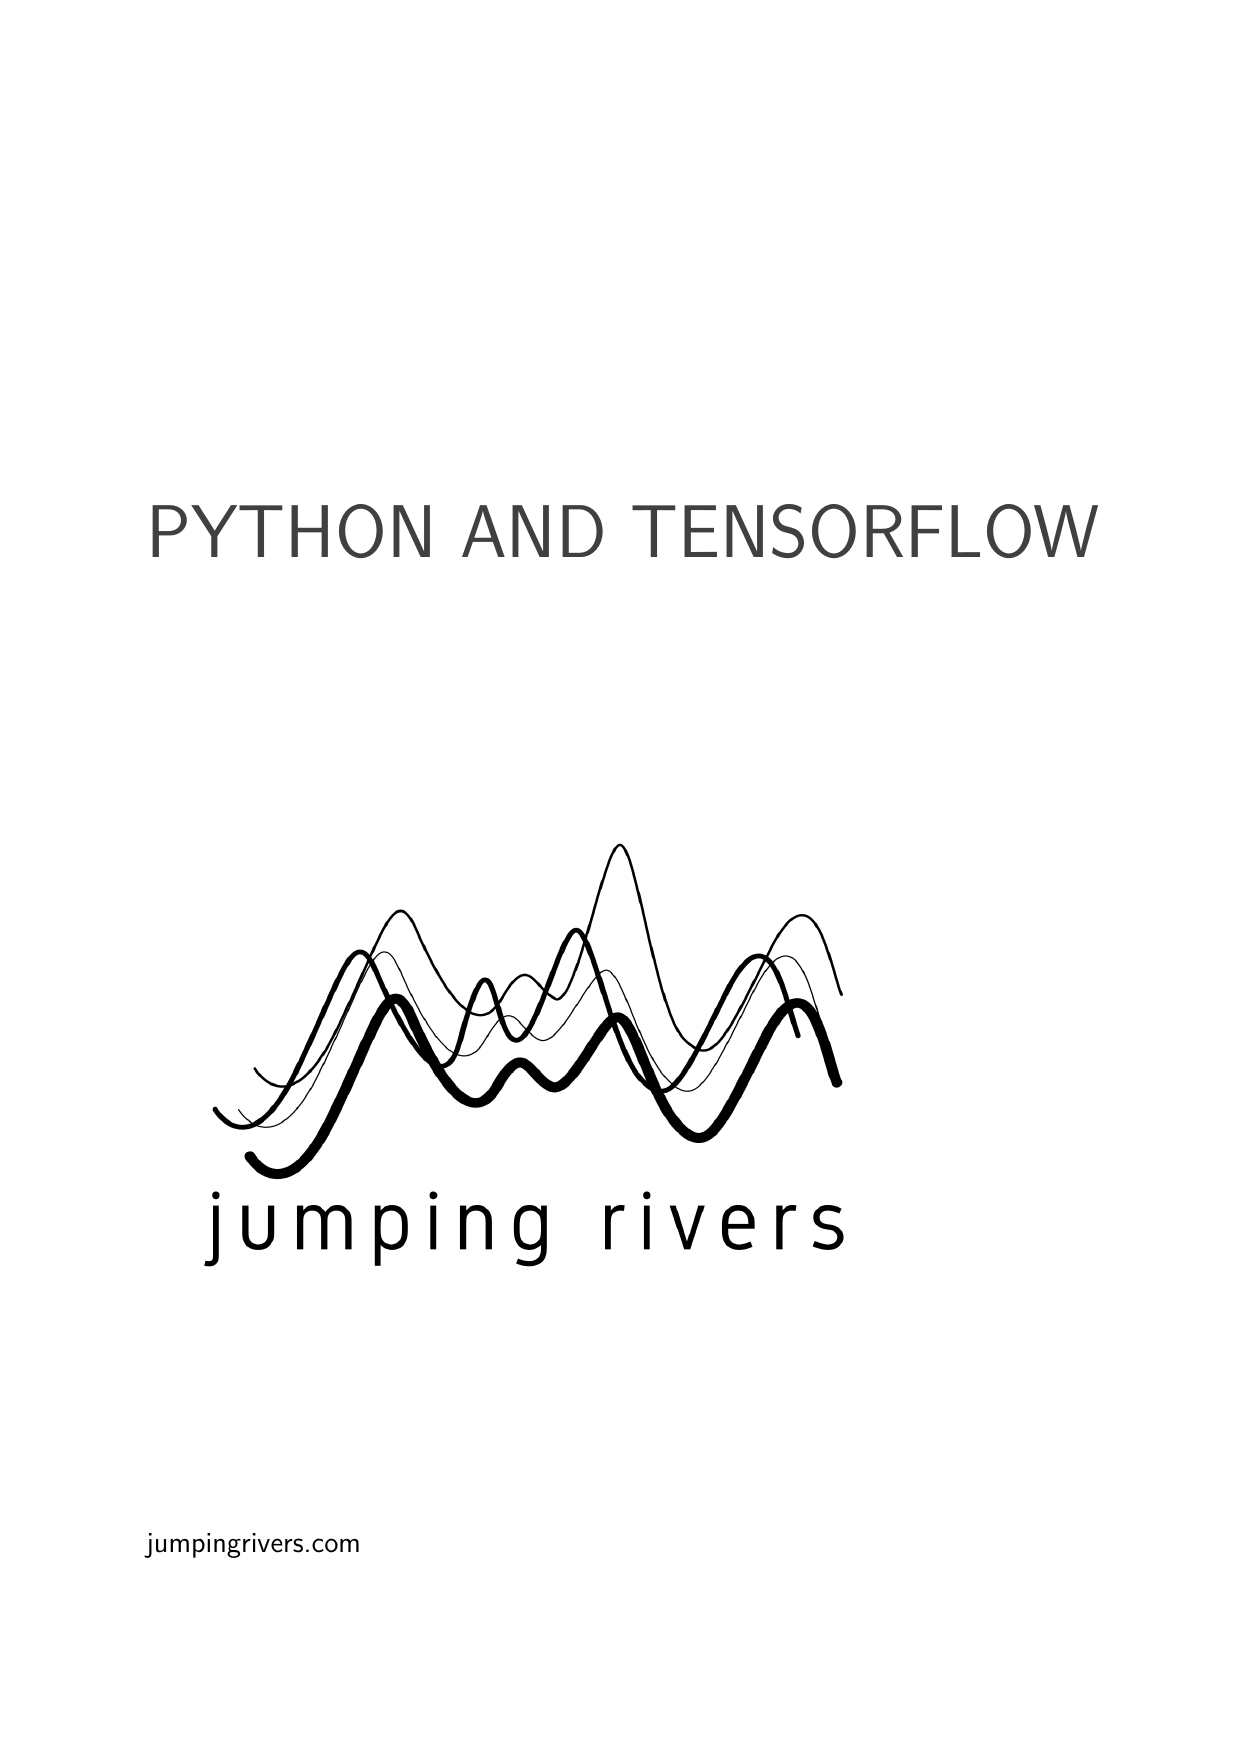 Example course material for 'Python and Tensorflow